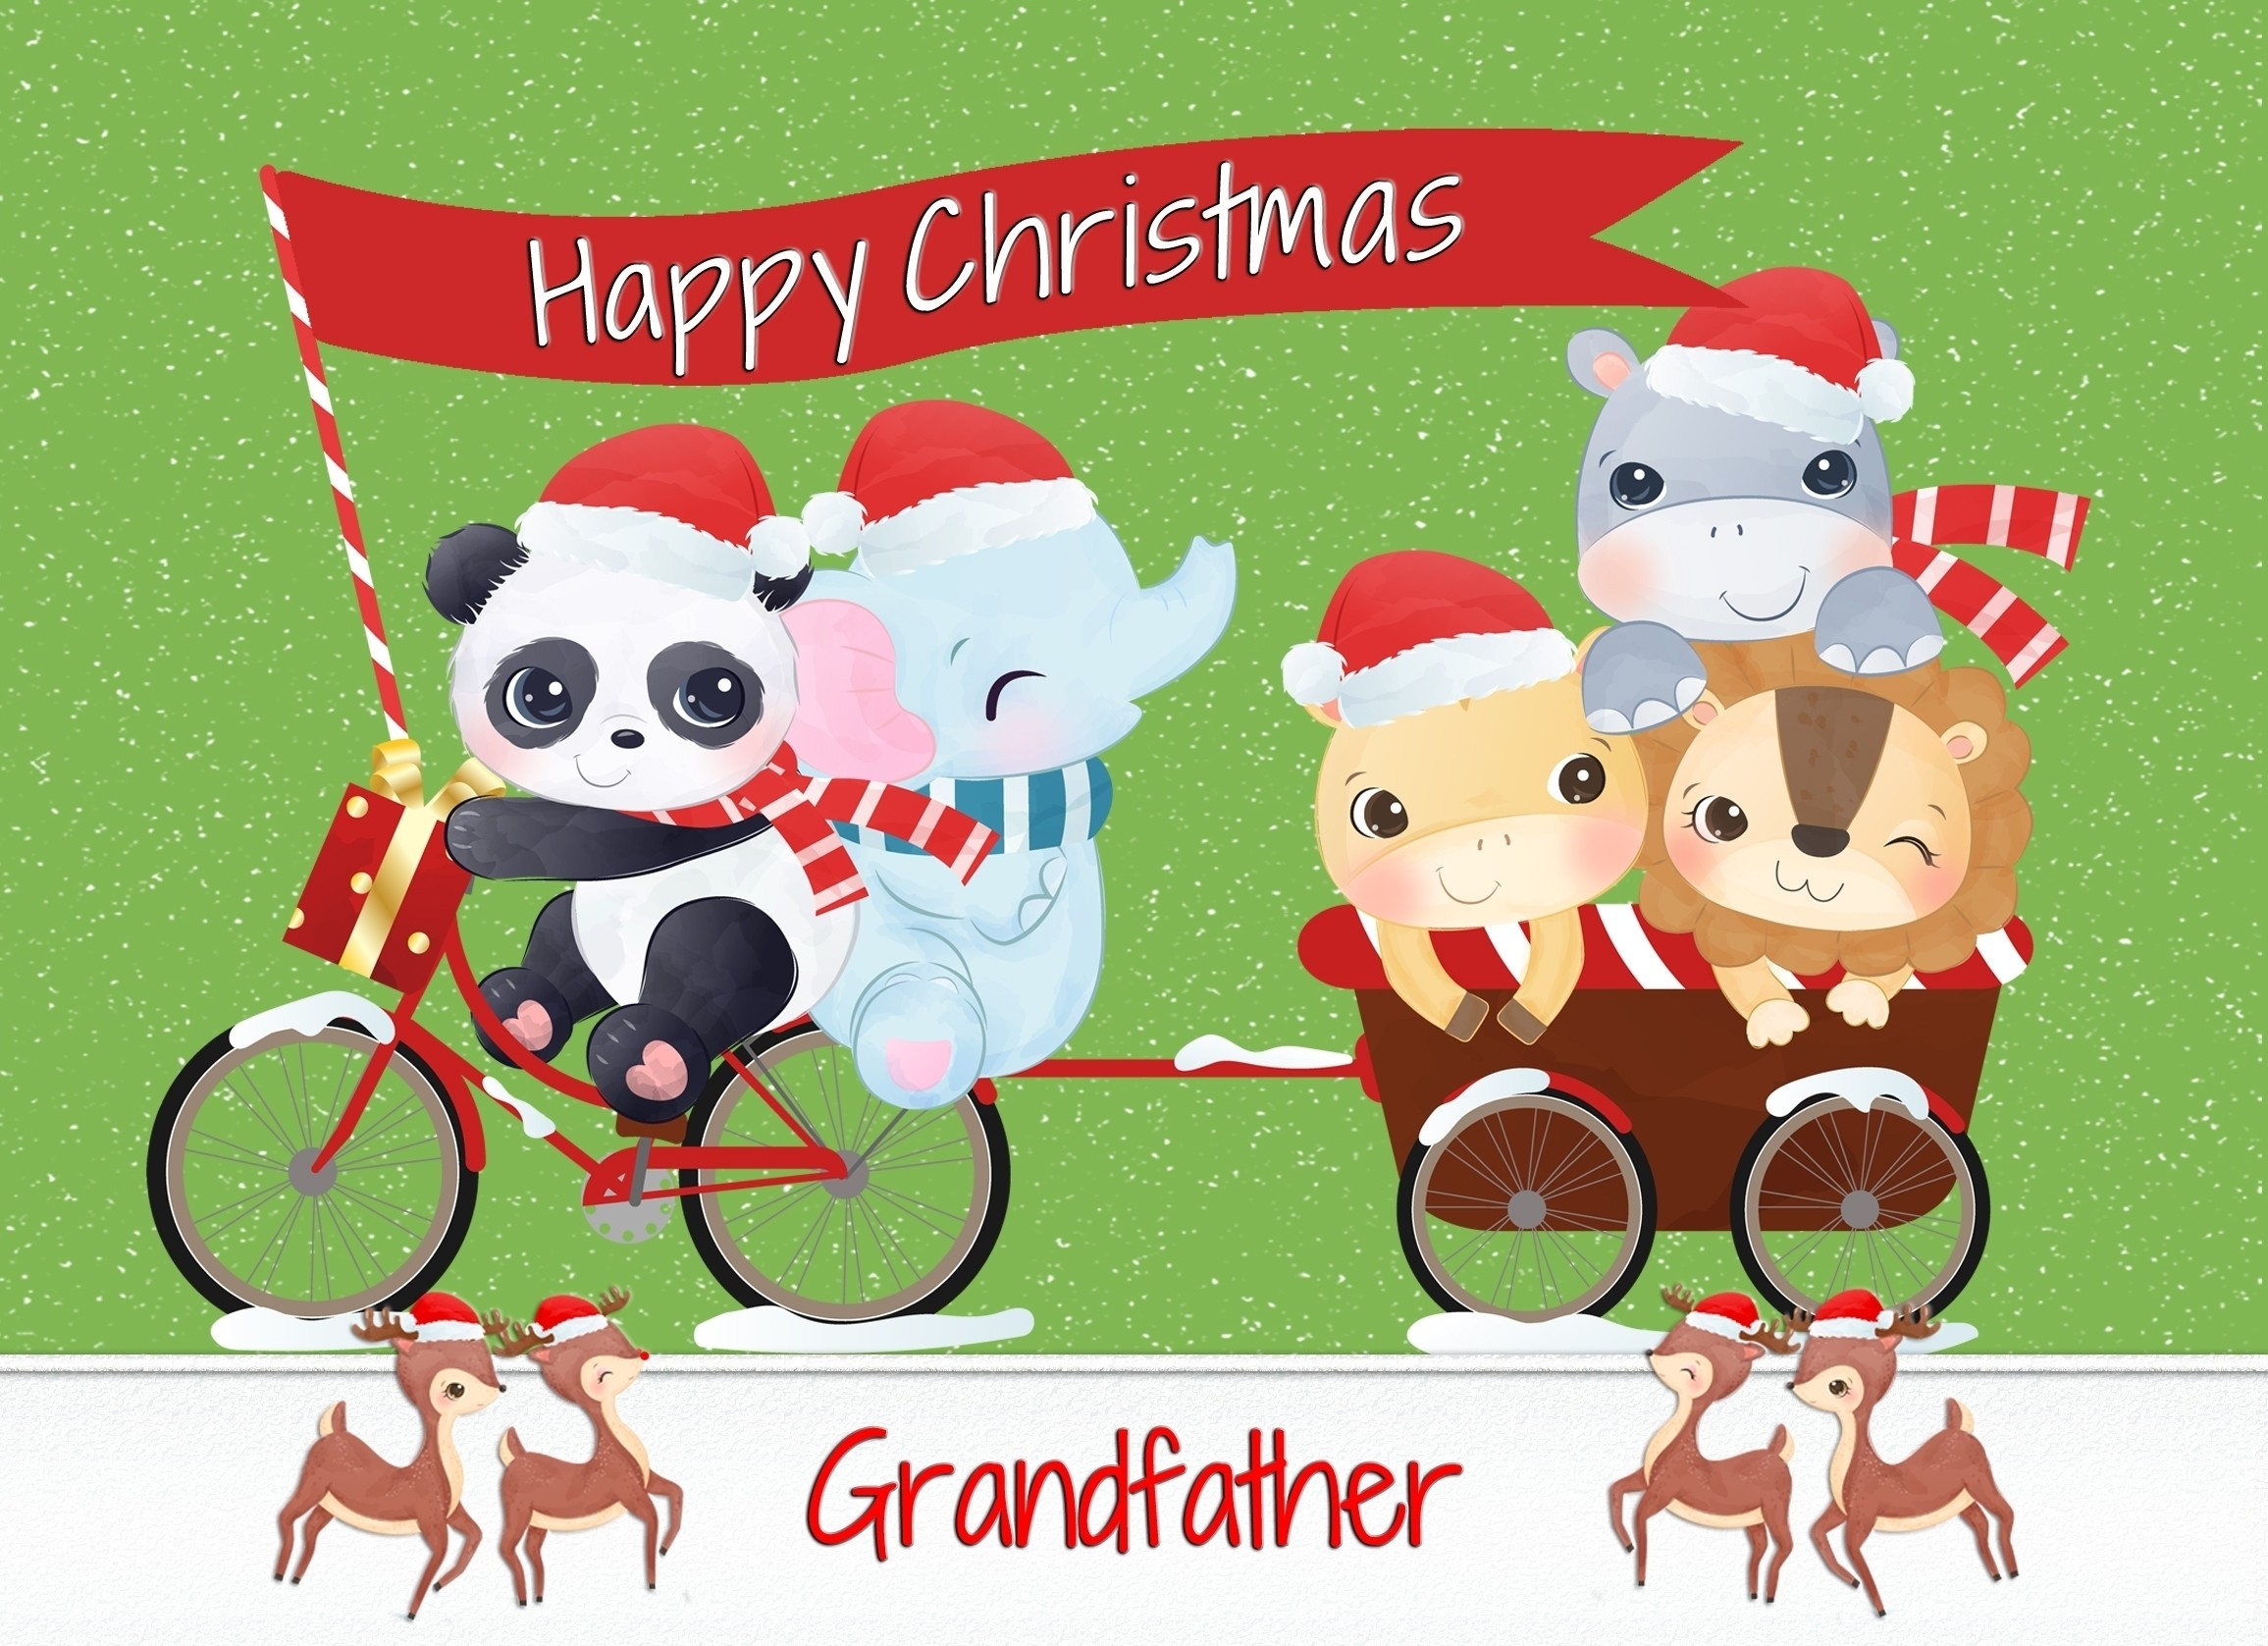 Christmas Card For Grandfather (Green Animals)